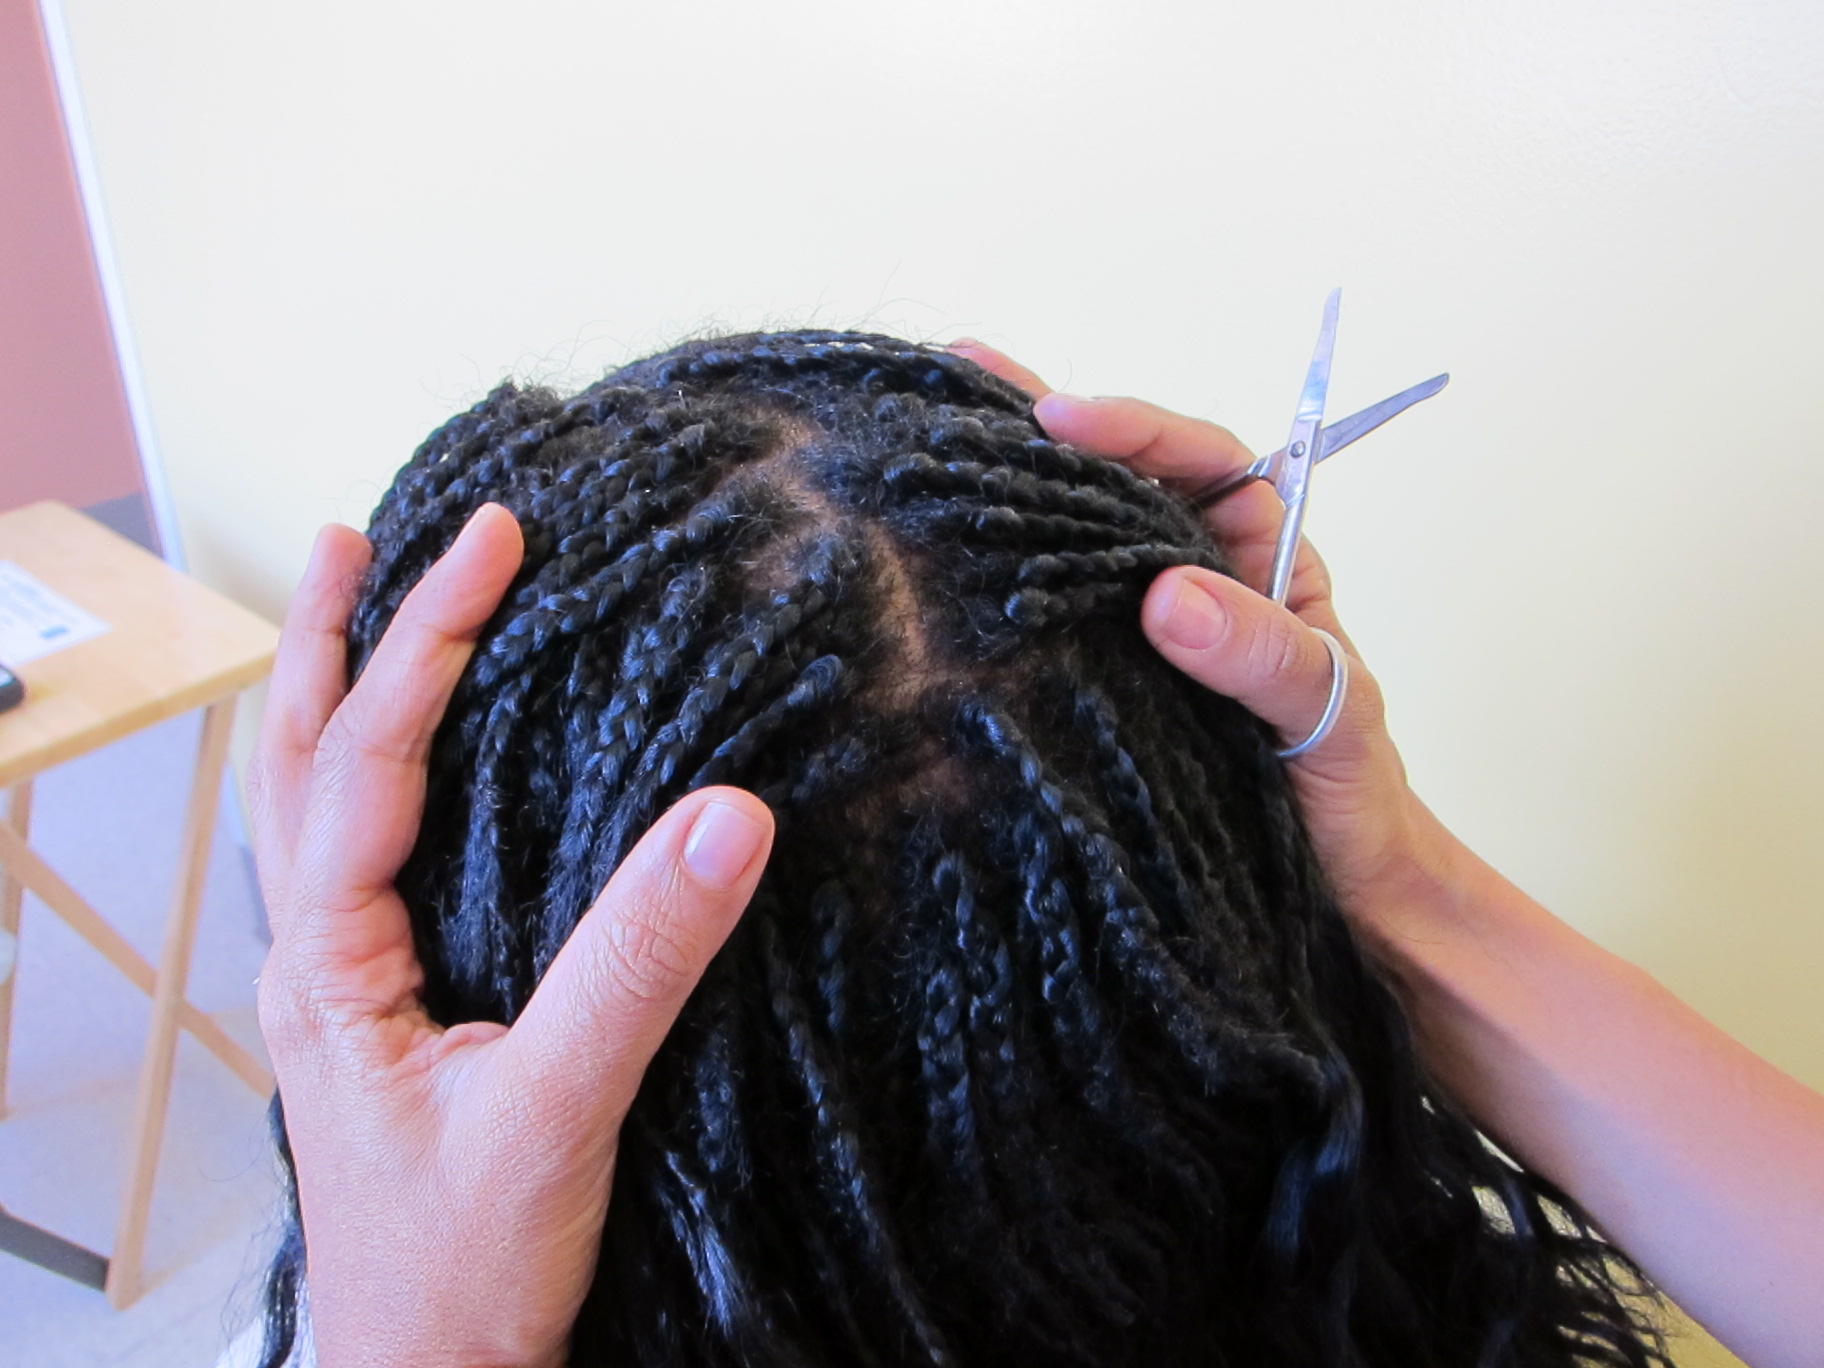 Looking at the back of a person's head at where hair braids connect to the scalp, b